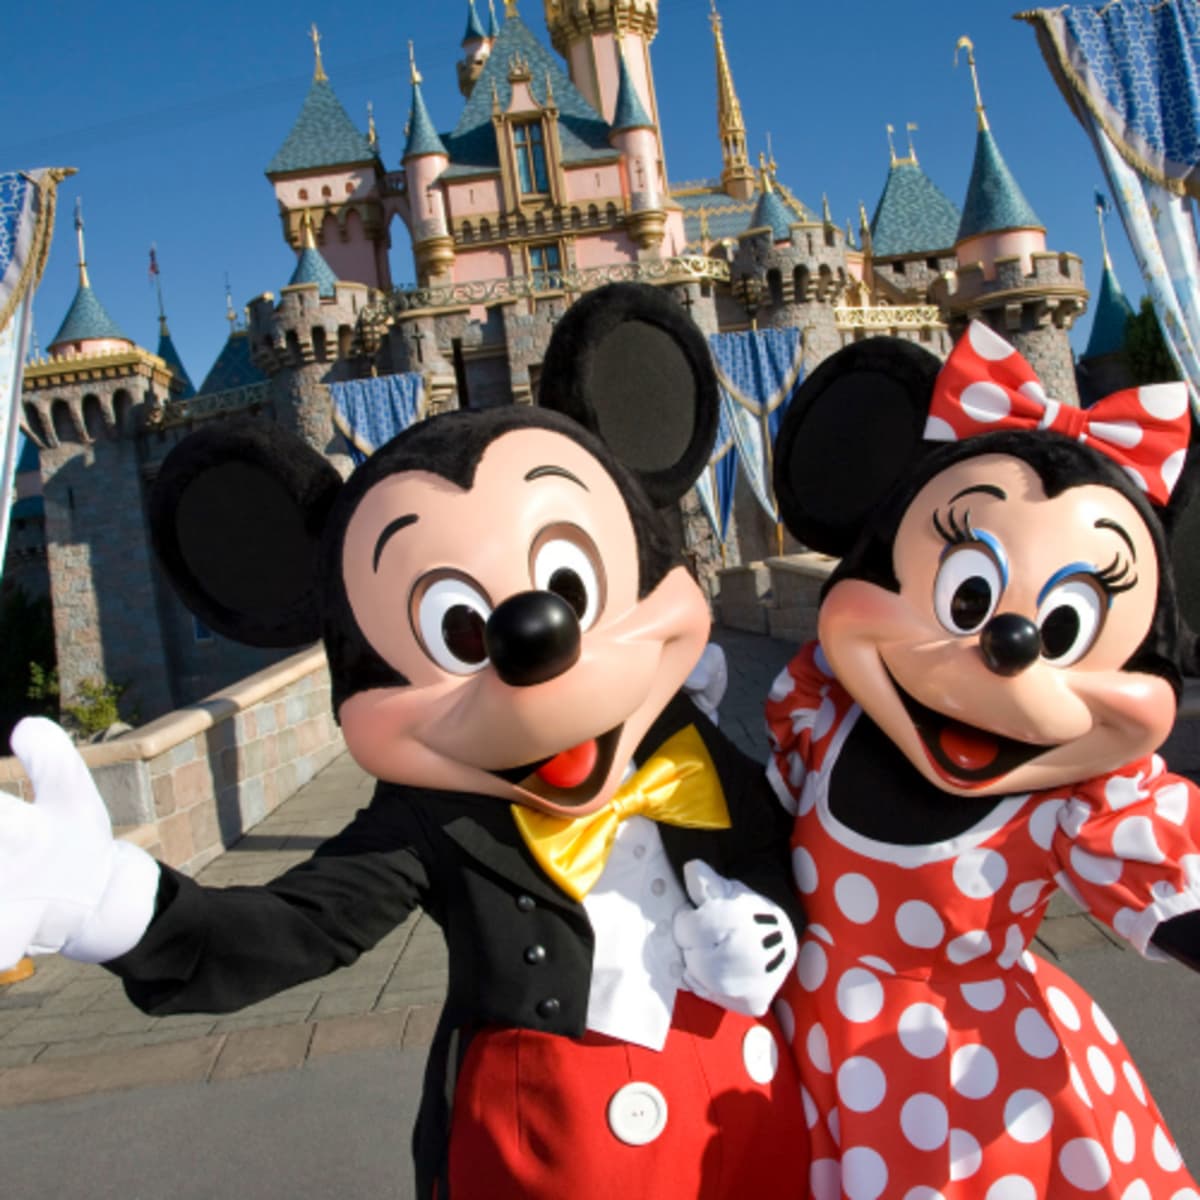 Where to Find Mickey and Minnie at Disney World 